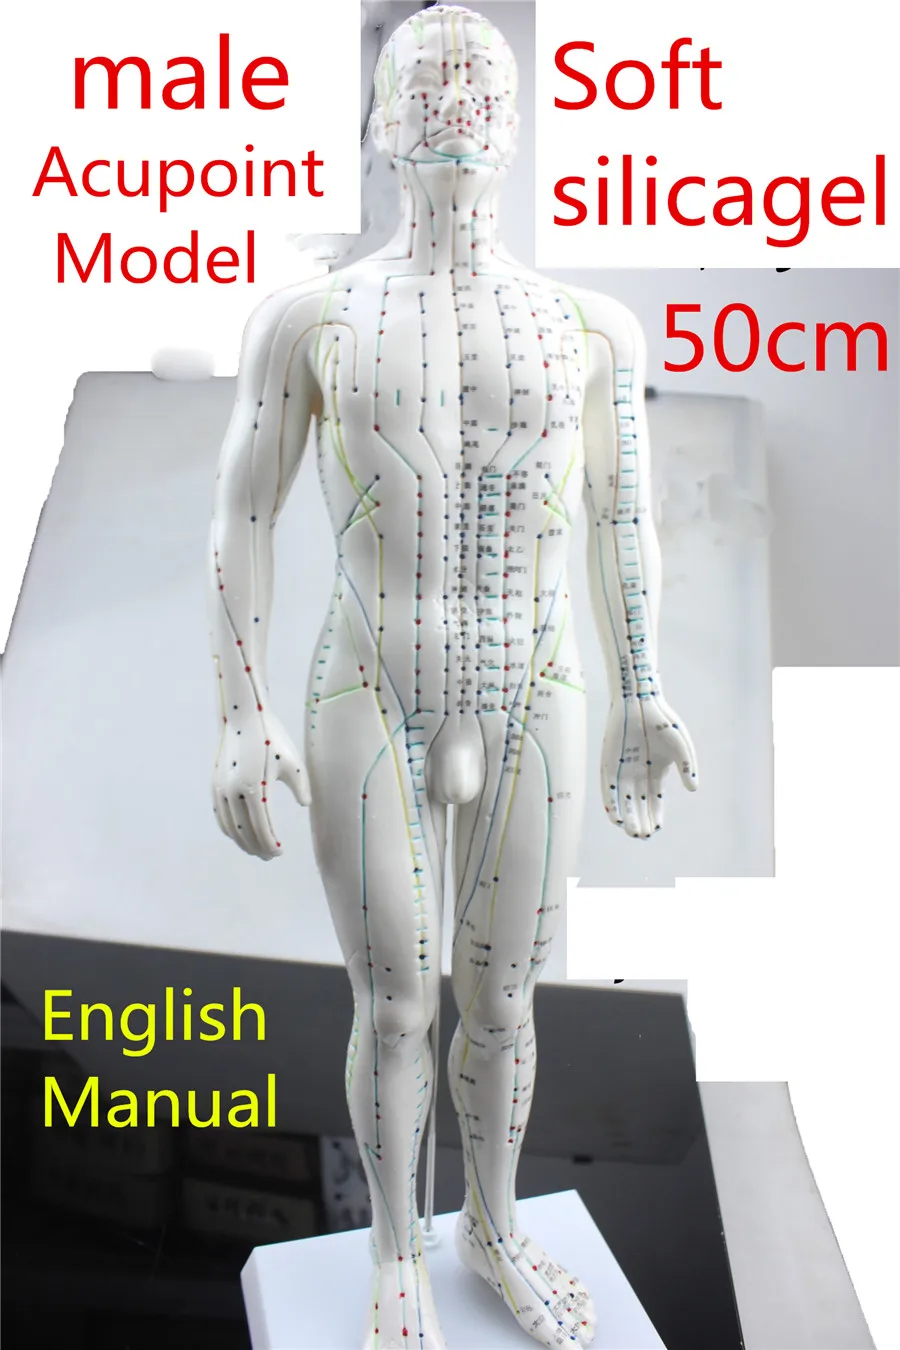 HD Soft silicagel Acupuncture Model 50cm male with Base Human acupuncture meridians model Acupoint Model Acupuncture massage